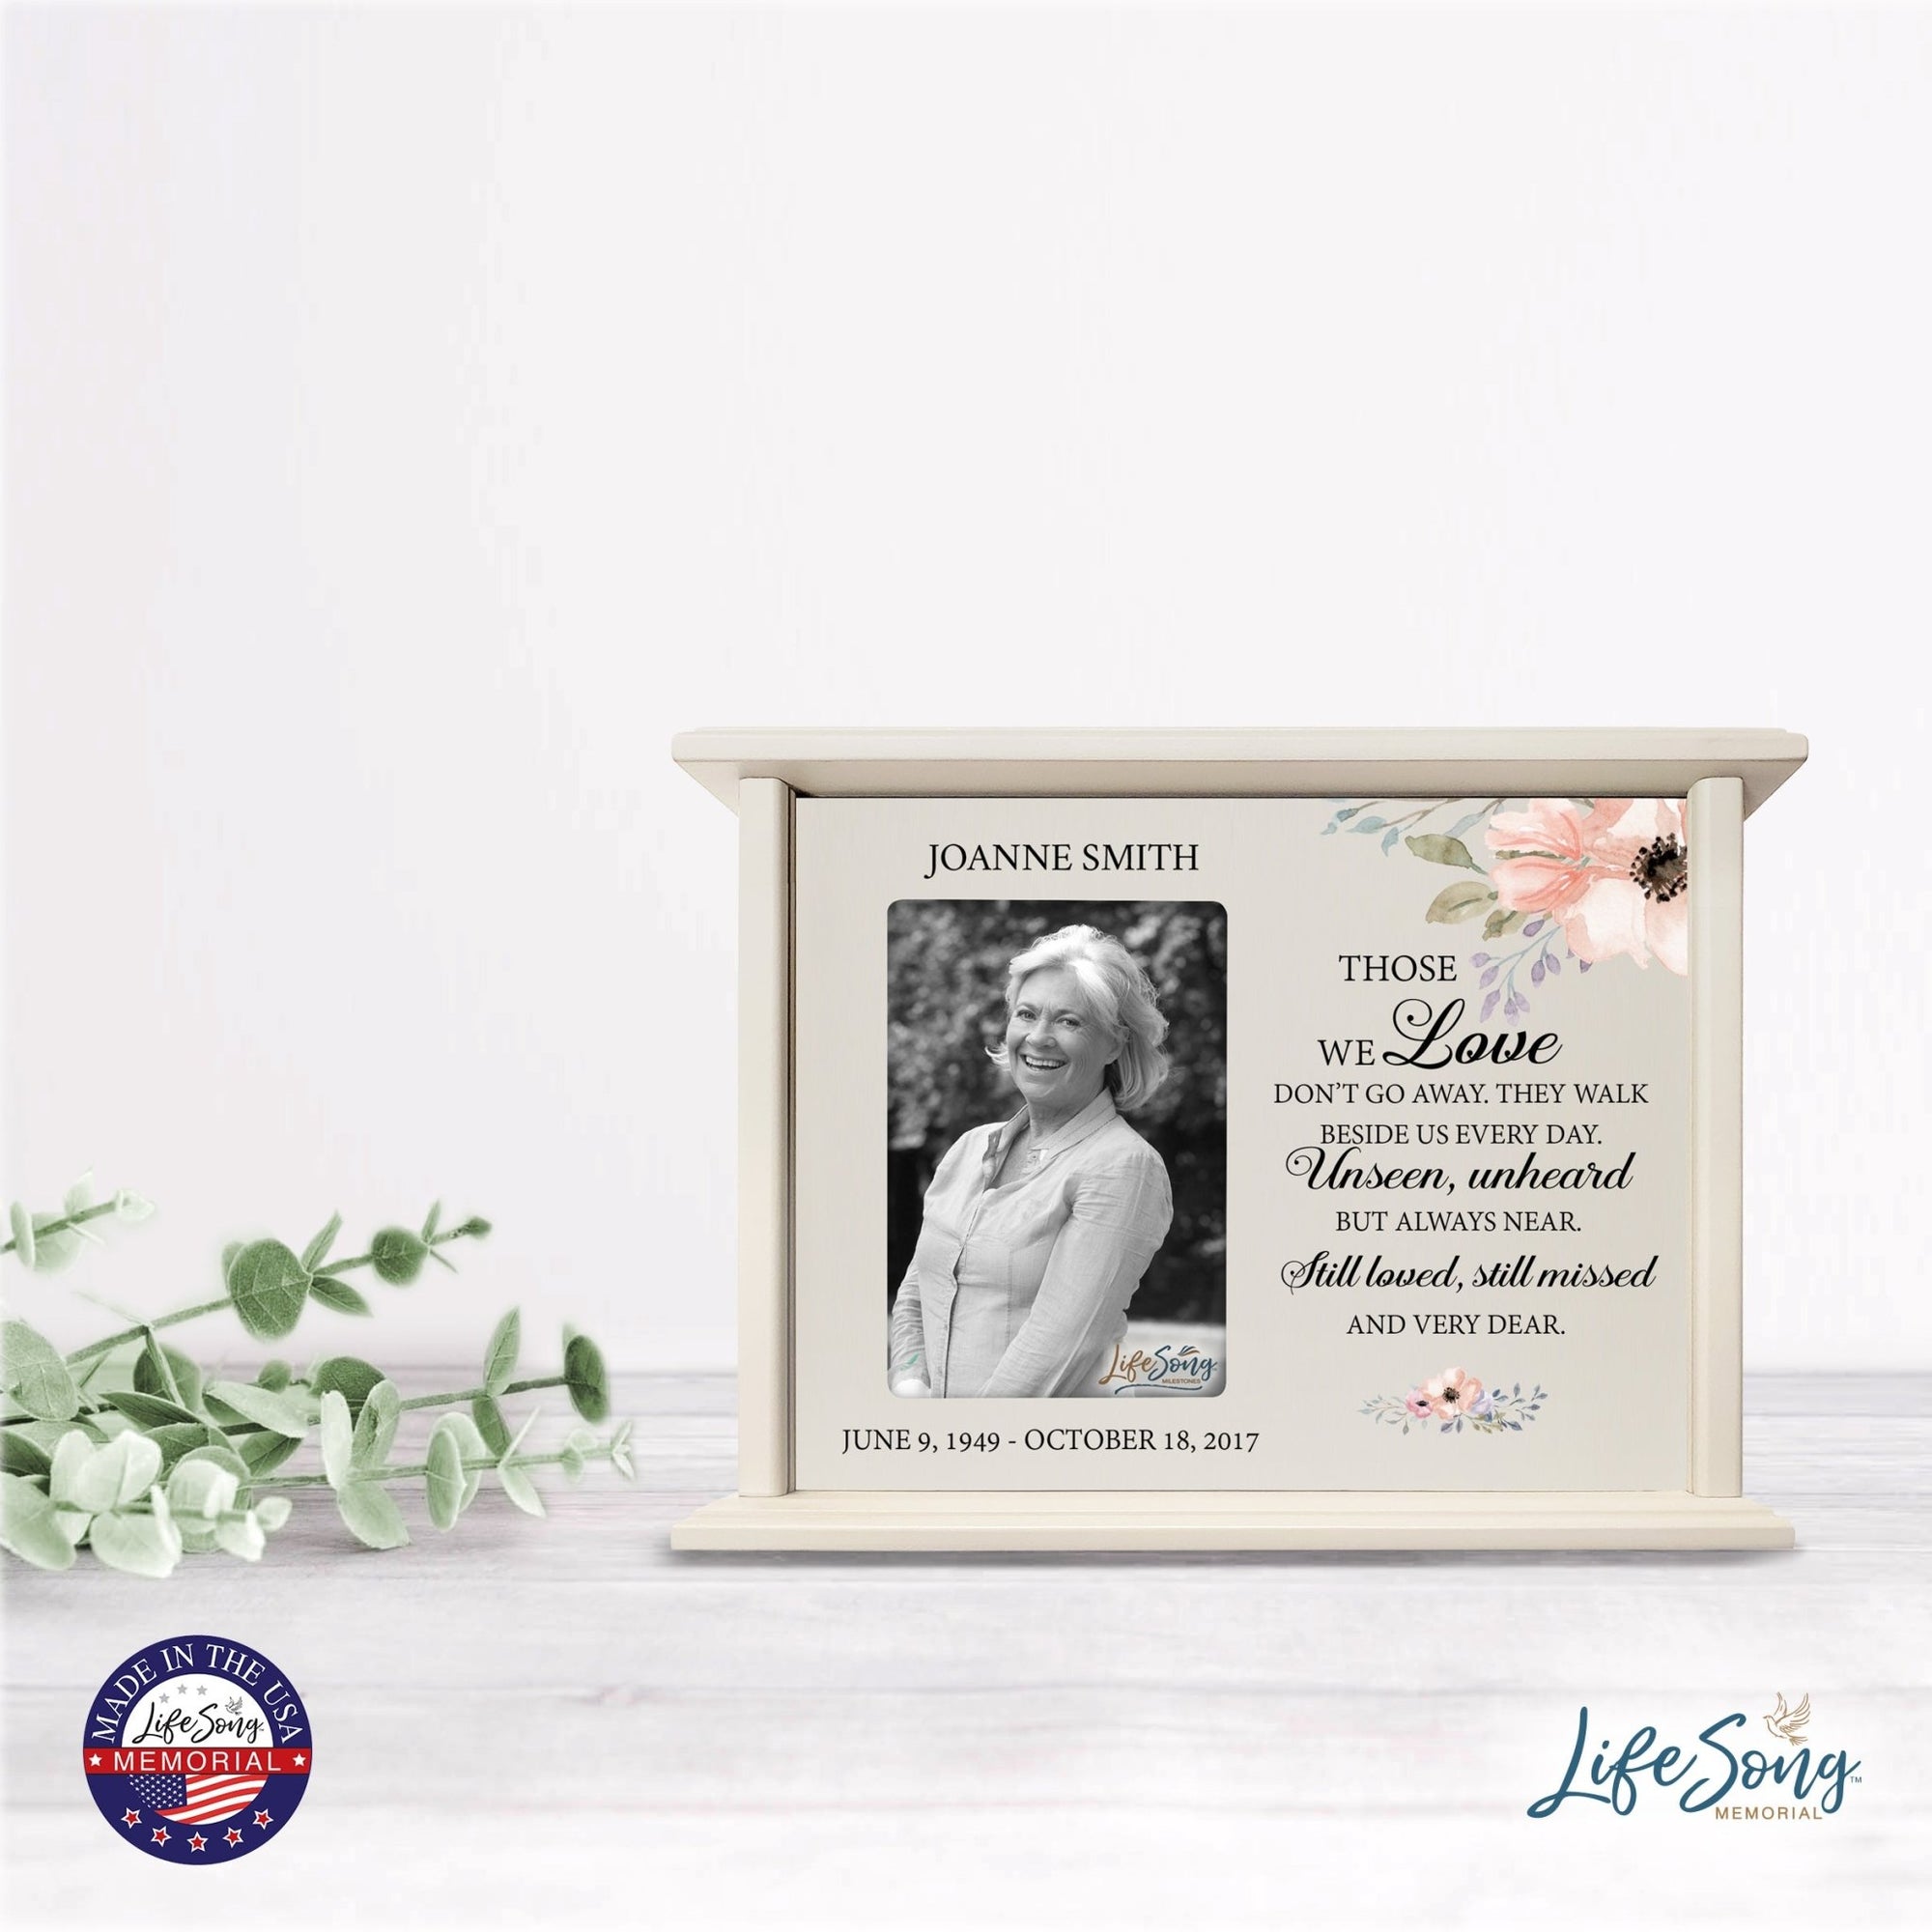 Personalized Memorial Cherry Wood 12 x 4.5 x 9 Cremation Urn Box with Picture Frame holds 200 cu in of Human Ashes and 4x6 Photo - Those We Love Don’t Go - LifeSong Milestones